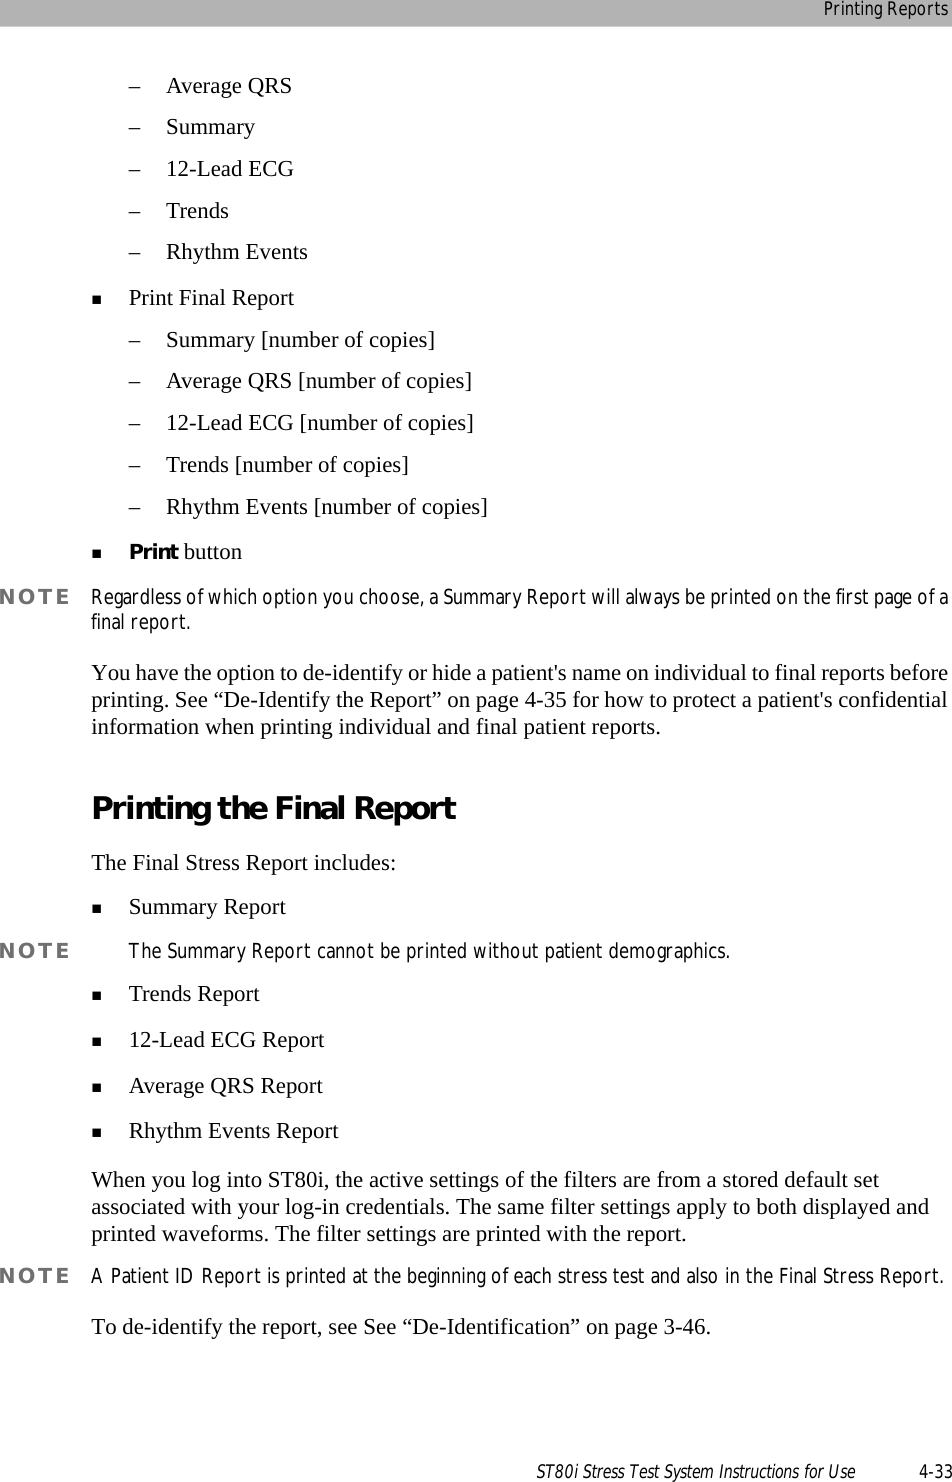 Printing ReportsST80i Stress Test System Instructions for Use 4-33– Average QRS–Summary– 12-Lead ECG–Trends– Rhythm EventsPrint Final Report– Summary [number of copies]– Average QRS [number of copies]– 12-Lead ECG [number of copies]– Trends [number of copies]– Rhythm Events [number of copies]Print buttonNOTE Regardless of which option you choose, a Summary Report will always be printed on the first page of a final report. You have the option to de-identify or hide a patient&apos;s name on individual to final reports before printing. See “De-Identify the Report” on page 4-35 for how to protect a patient&apos;s confidential information when printing individual and final patient reports.Printing the Final ReportThe Final Stress Report includes:Summary ReportNOTE The Summary Report cannot be printed without patient demographics. Trends Report12-Lead ECG ReportAverage QRS ReportRhythm Events ReportWhen you log into ST80i, the active settings of the filters are from a stored default set associated with your log-in credentials. The same filter settings apply to both displayed and printed waveforms. The filter settings are printed with the report. NOTE A Patient ID Report is printed at the beginning of each stress test and also in the Final Stress Report.To de-identify the report, see See “De-Identification” on page 3-46.